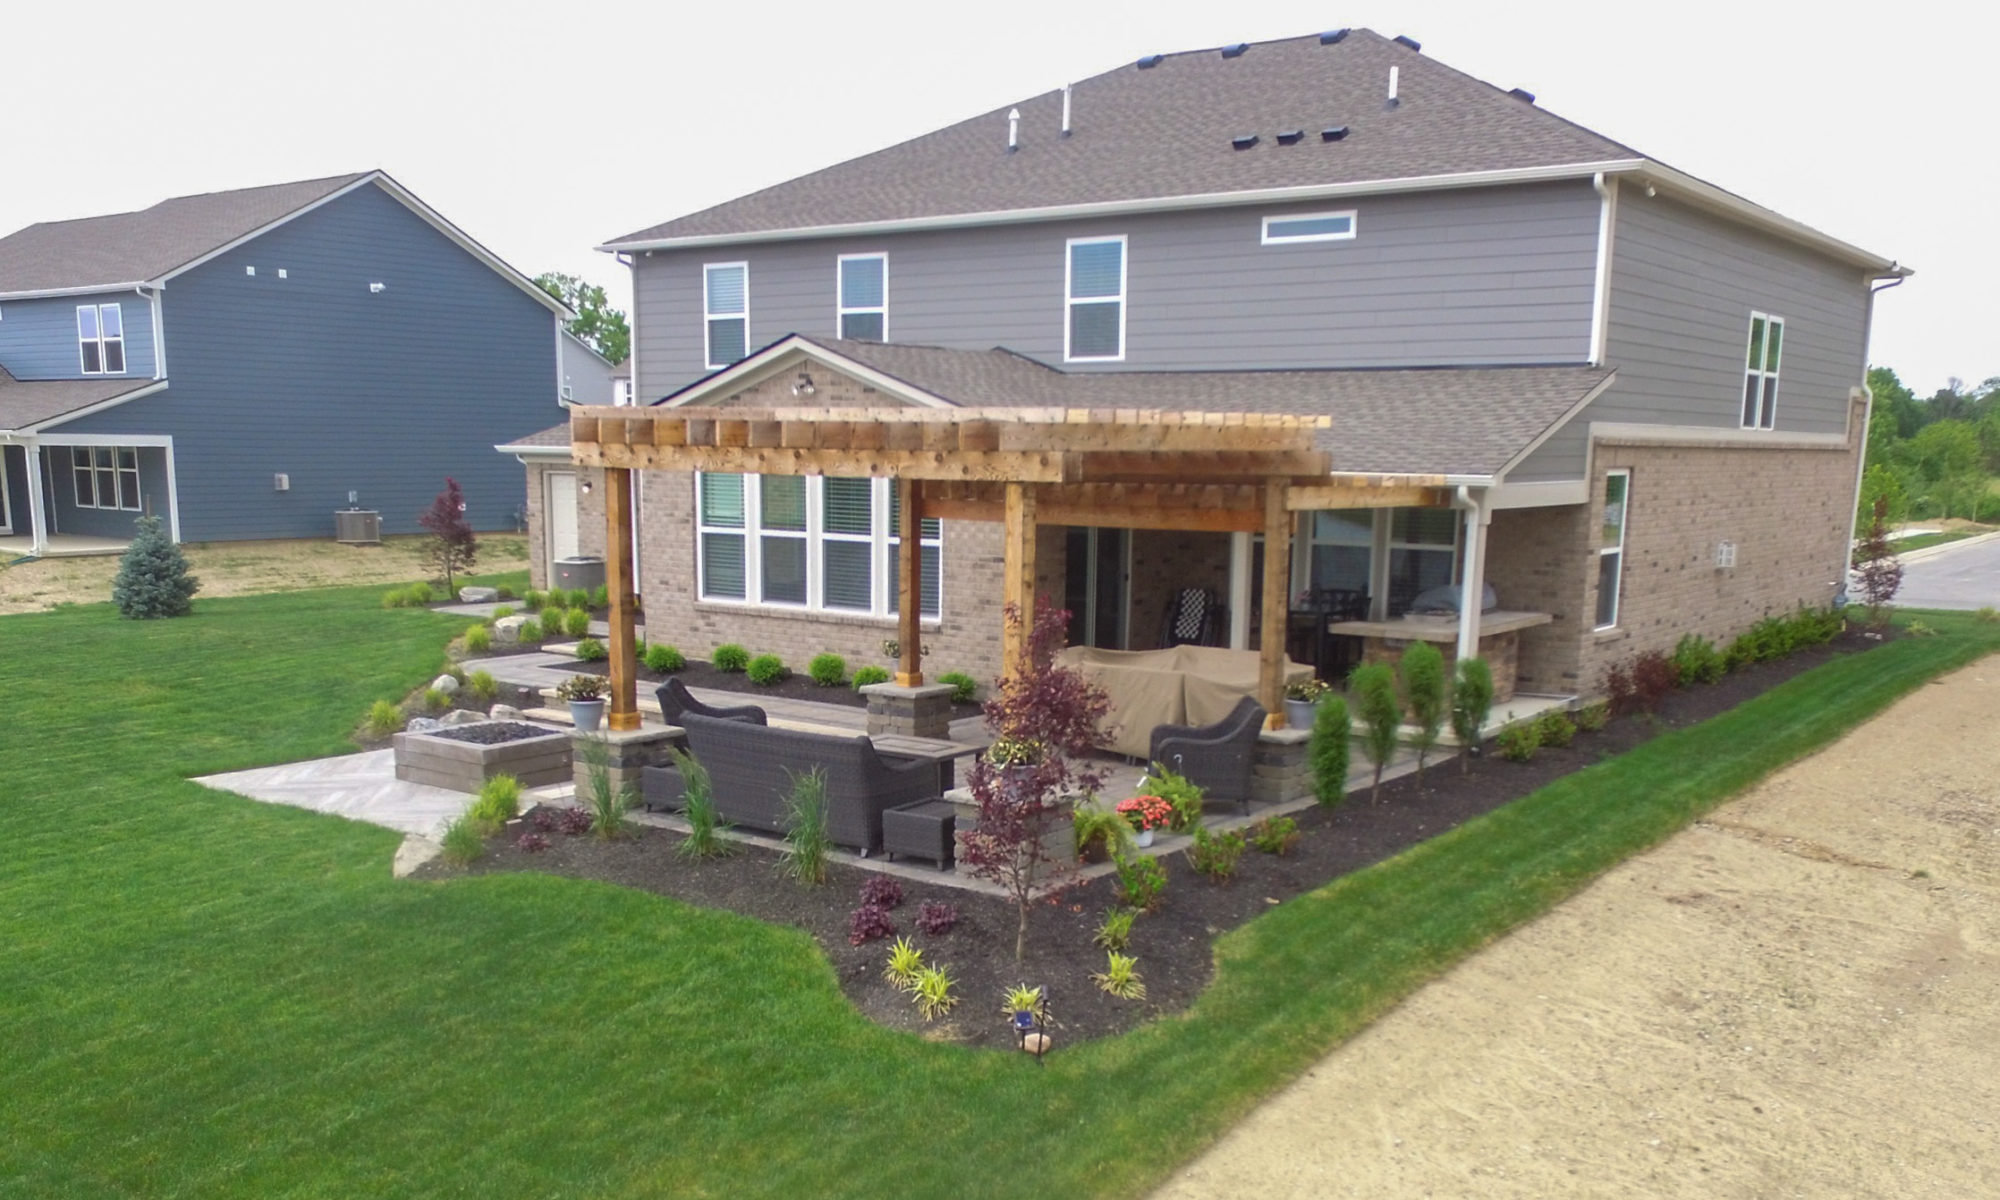 precision outdoors lawn care landscaping patio firepit pergola kitchen frill tech bloc fishers Indiana indianapolis